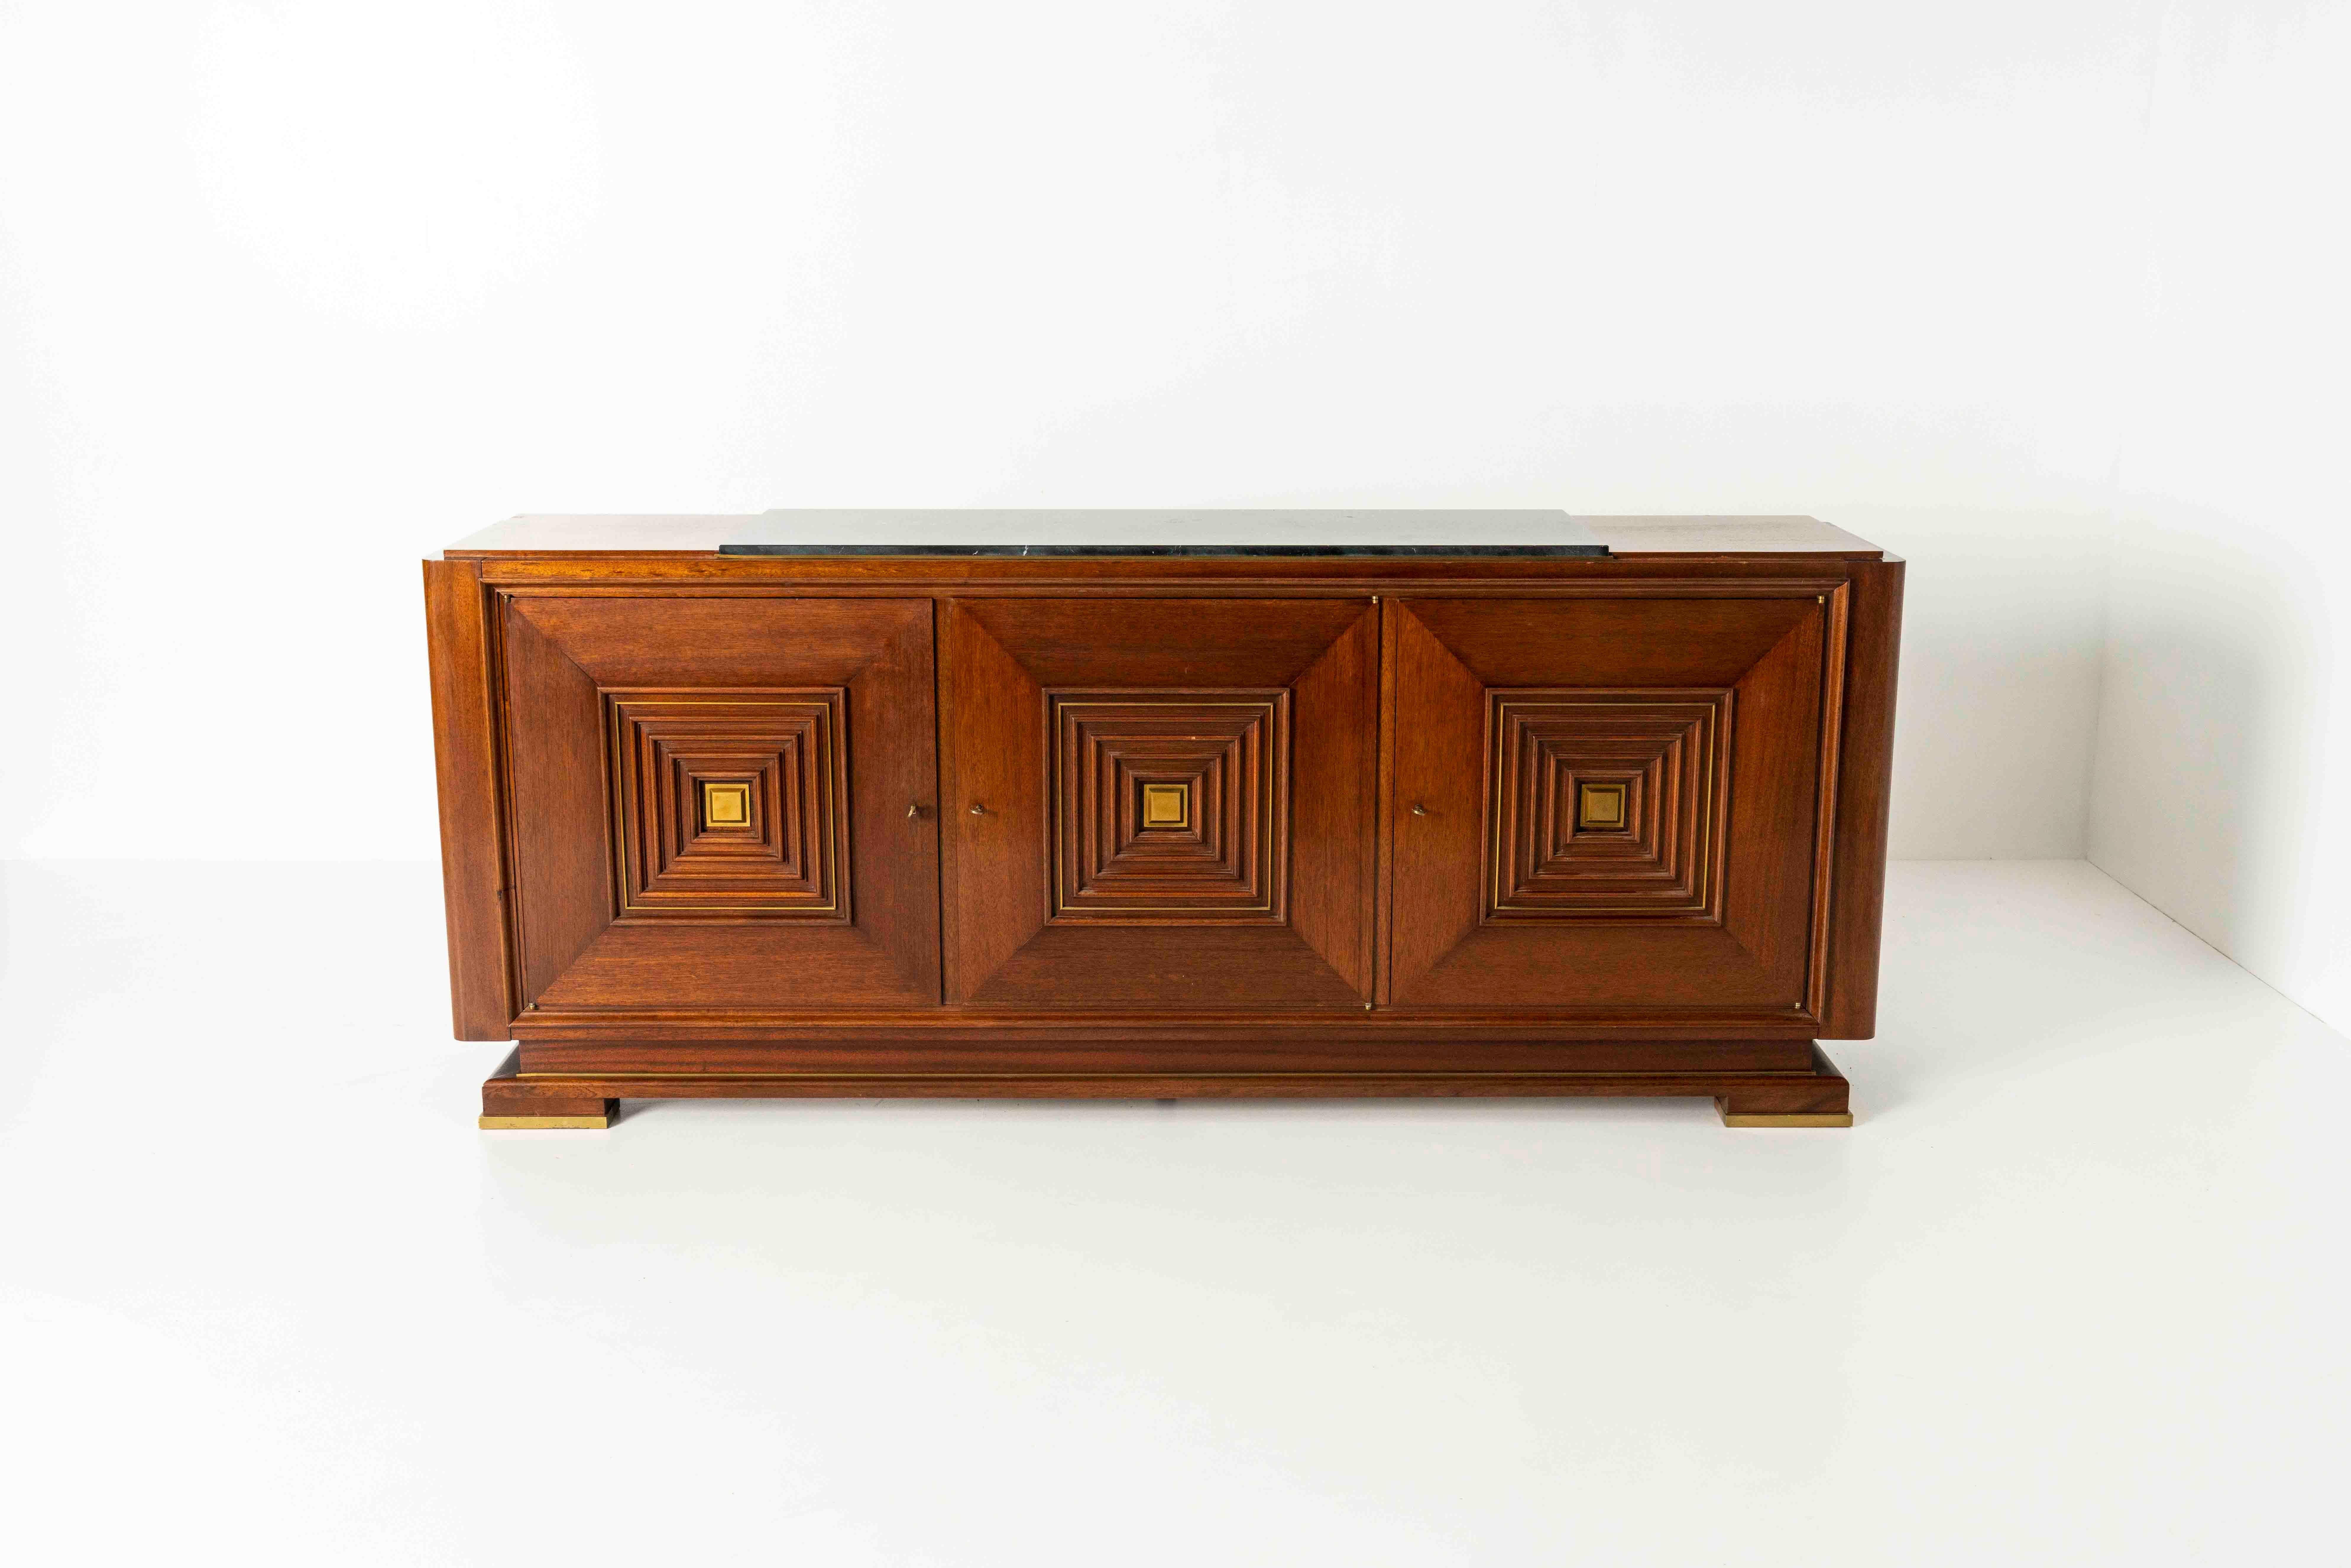 Sideboard in the Style of Maxime Old in Mahogany, Brass, and with a Marble Top. It has a drawer in the middle and shelves behind the left and right doors. We especially love the design of the legs and feet with the brass details. This impressive